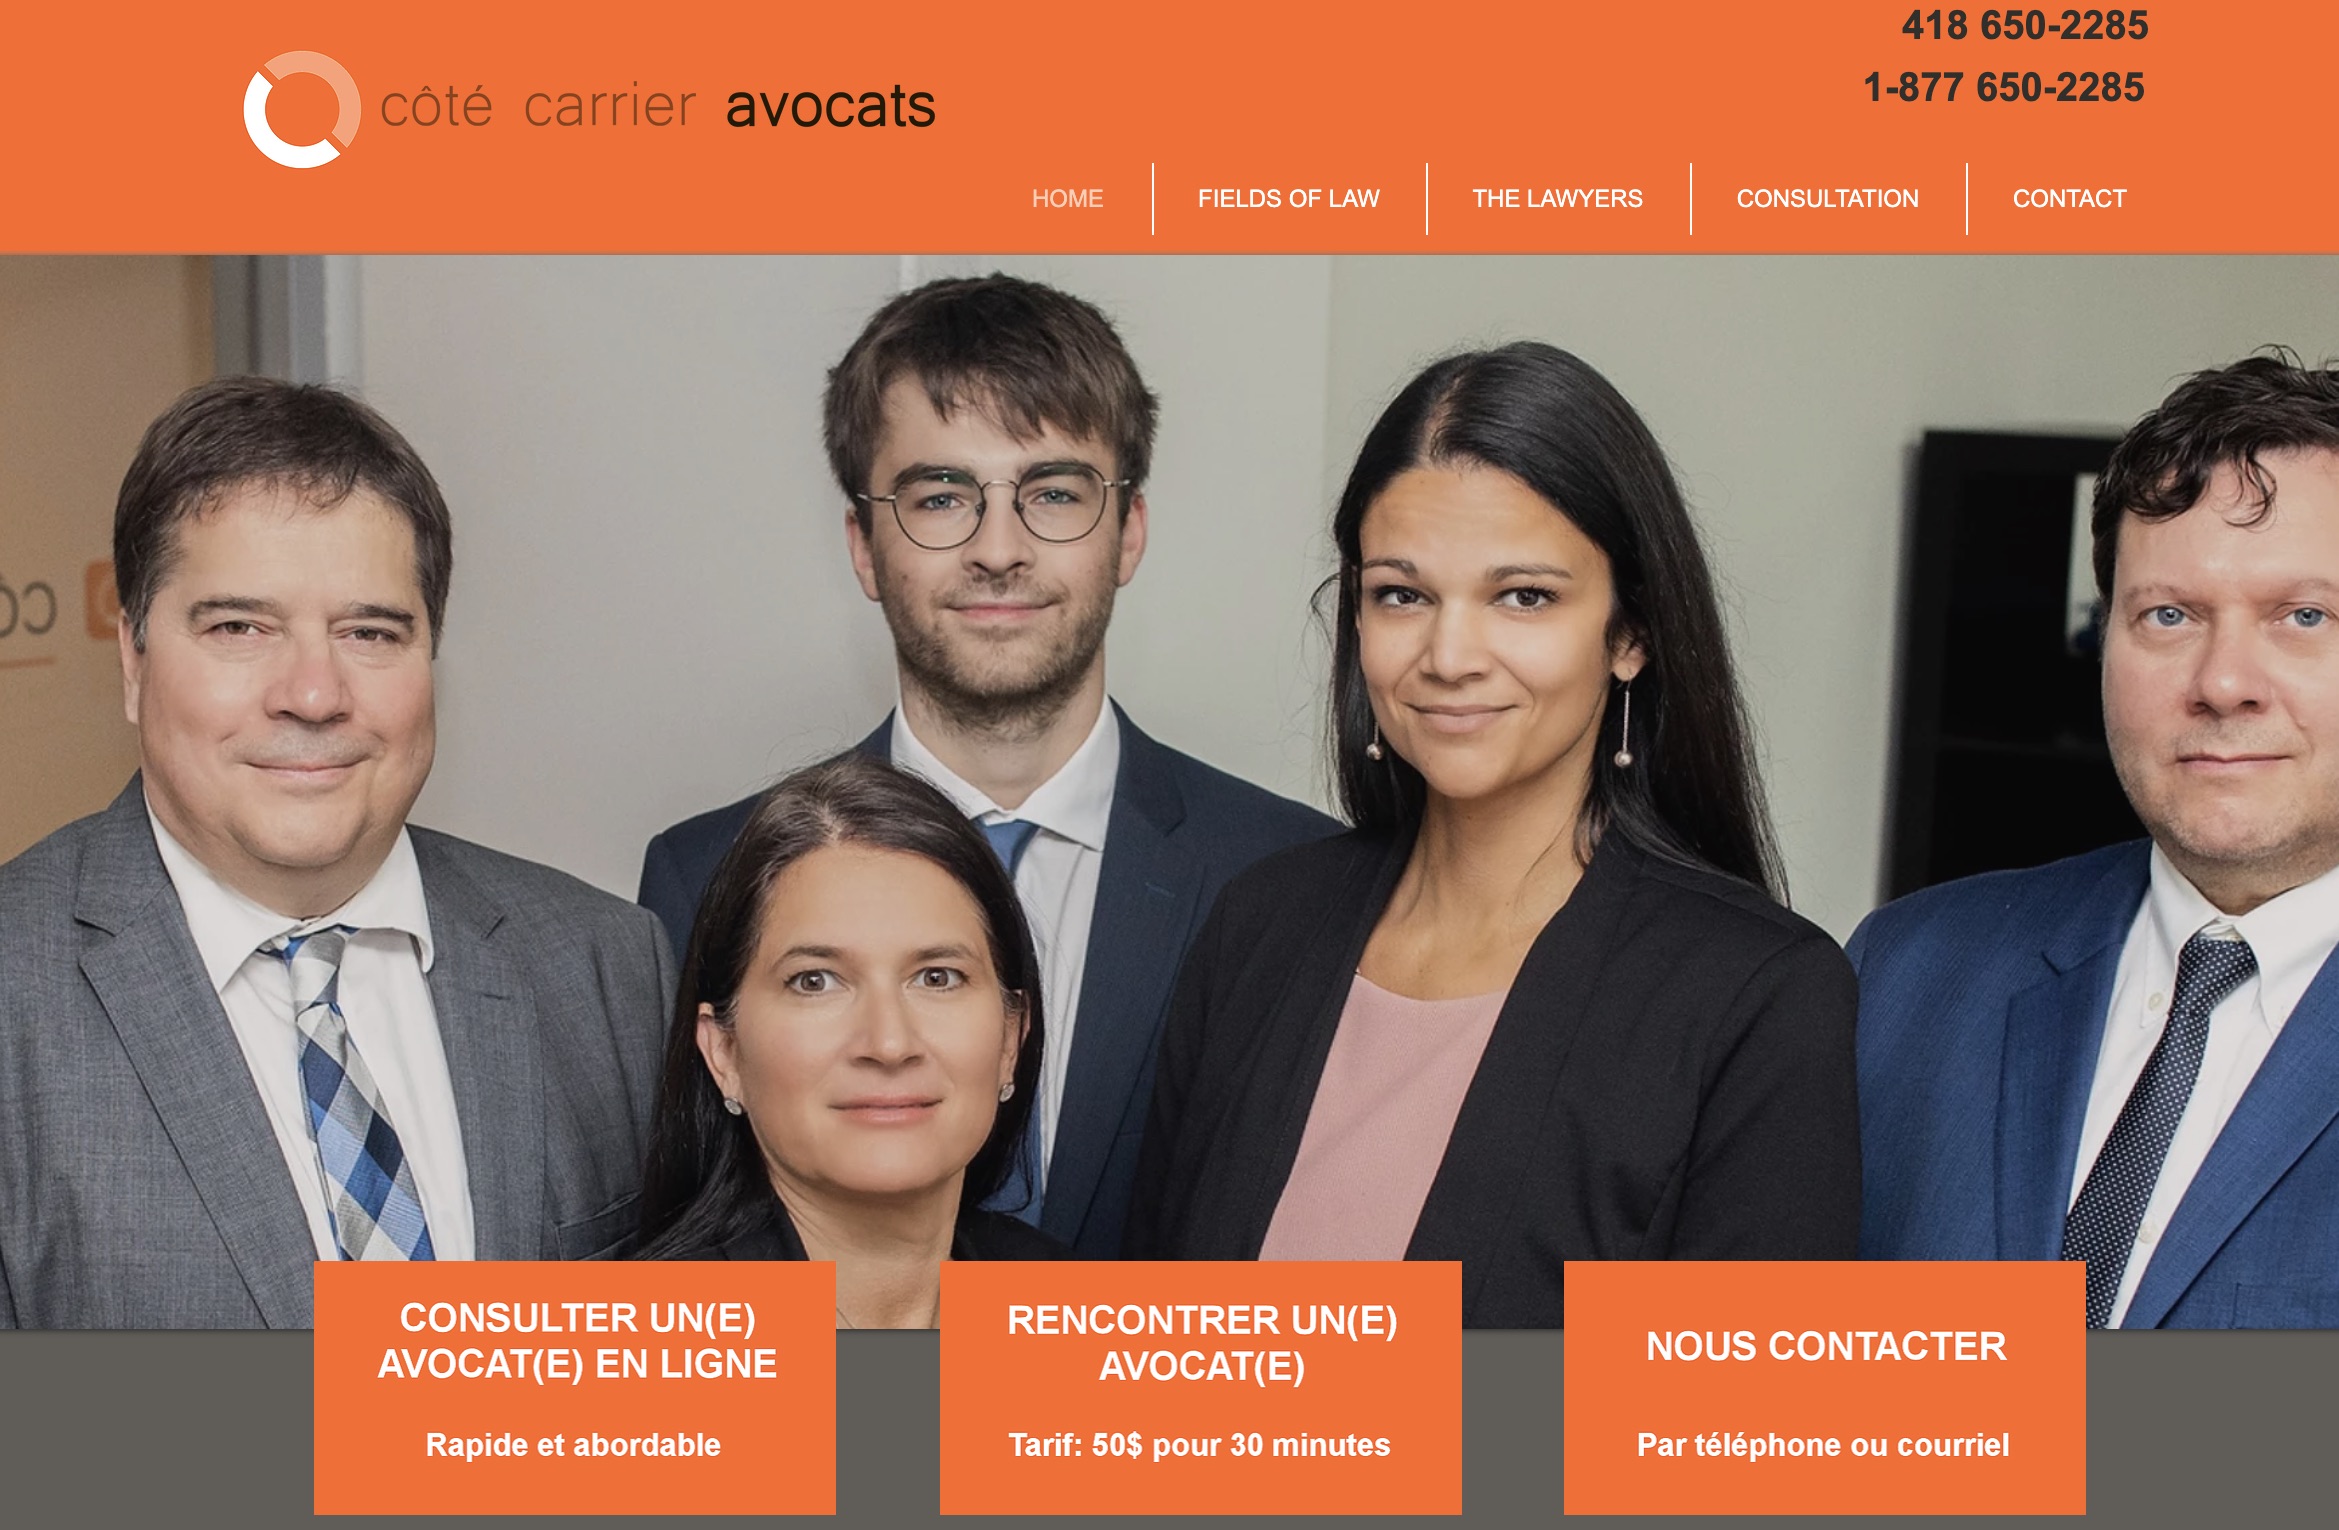 Cote Carrier Avocats